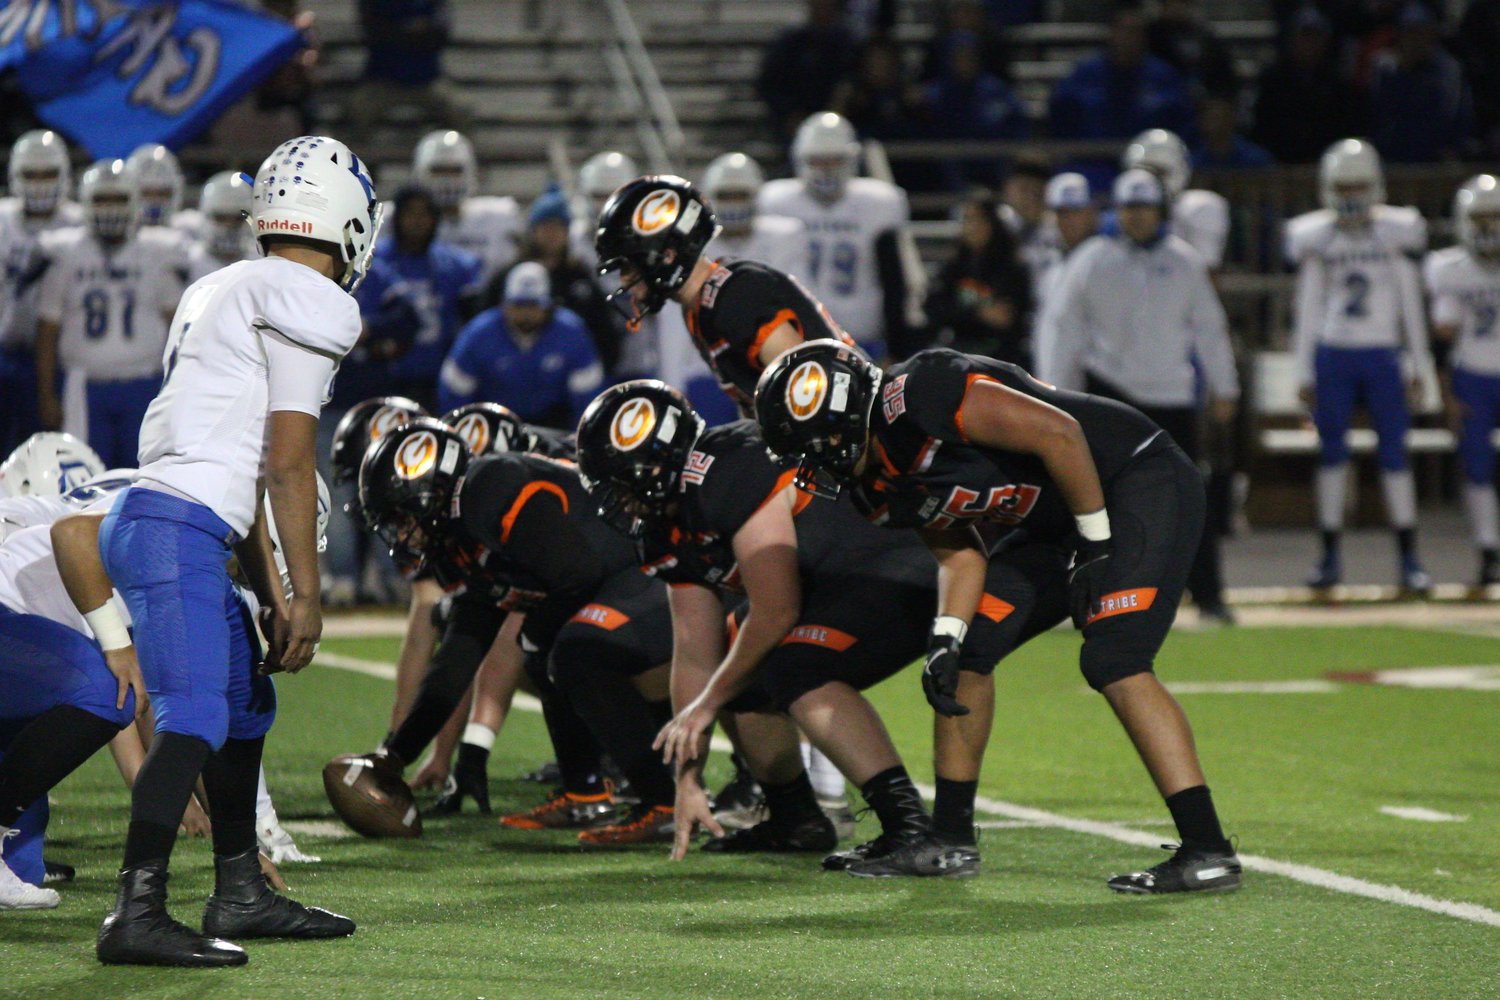 Gonzales head coach Mike Waldie gave props to his offensive line, who led the way in the Apaches’ offensive attack in their 21-point victory.